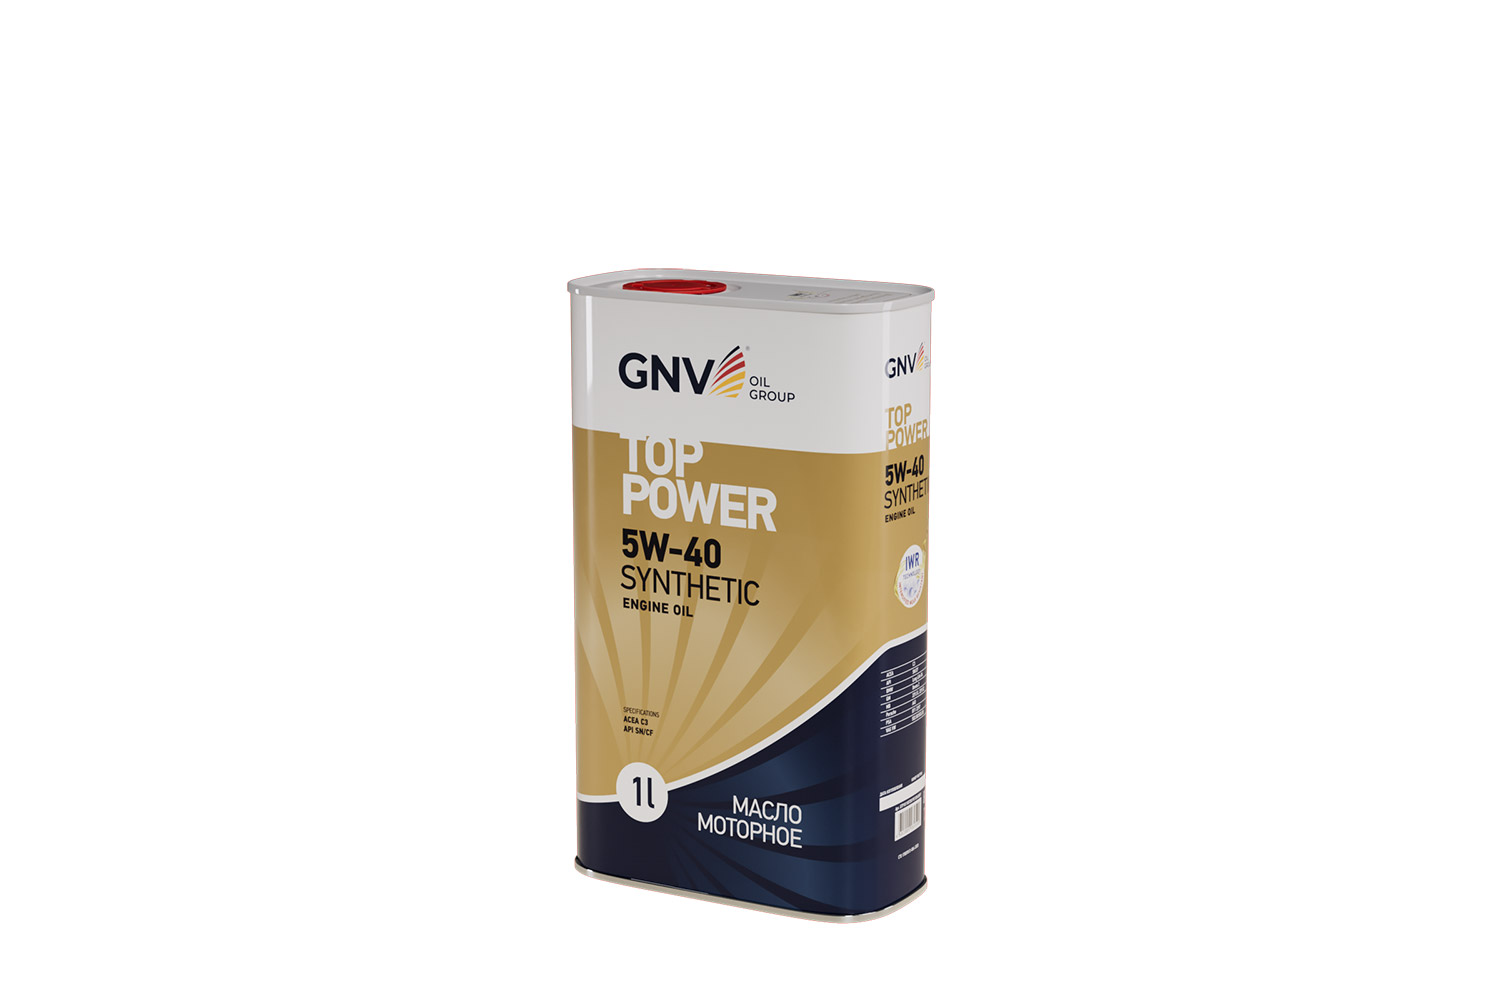 Моторное масло GNV Top Power 5W 40 Synthetic ACEA C3. MB 229.51/229.52 (мет.канистра 1 л.)